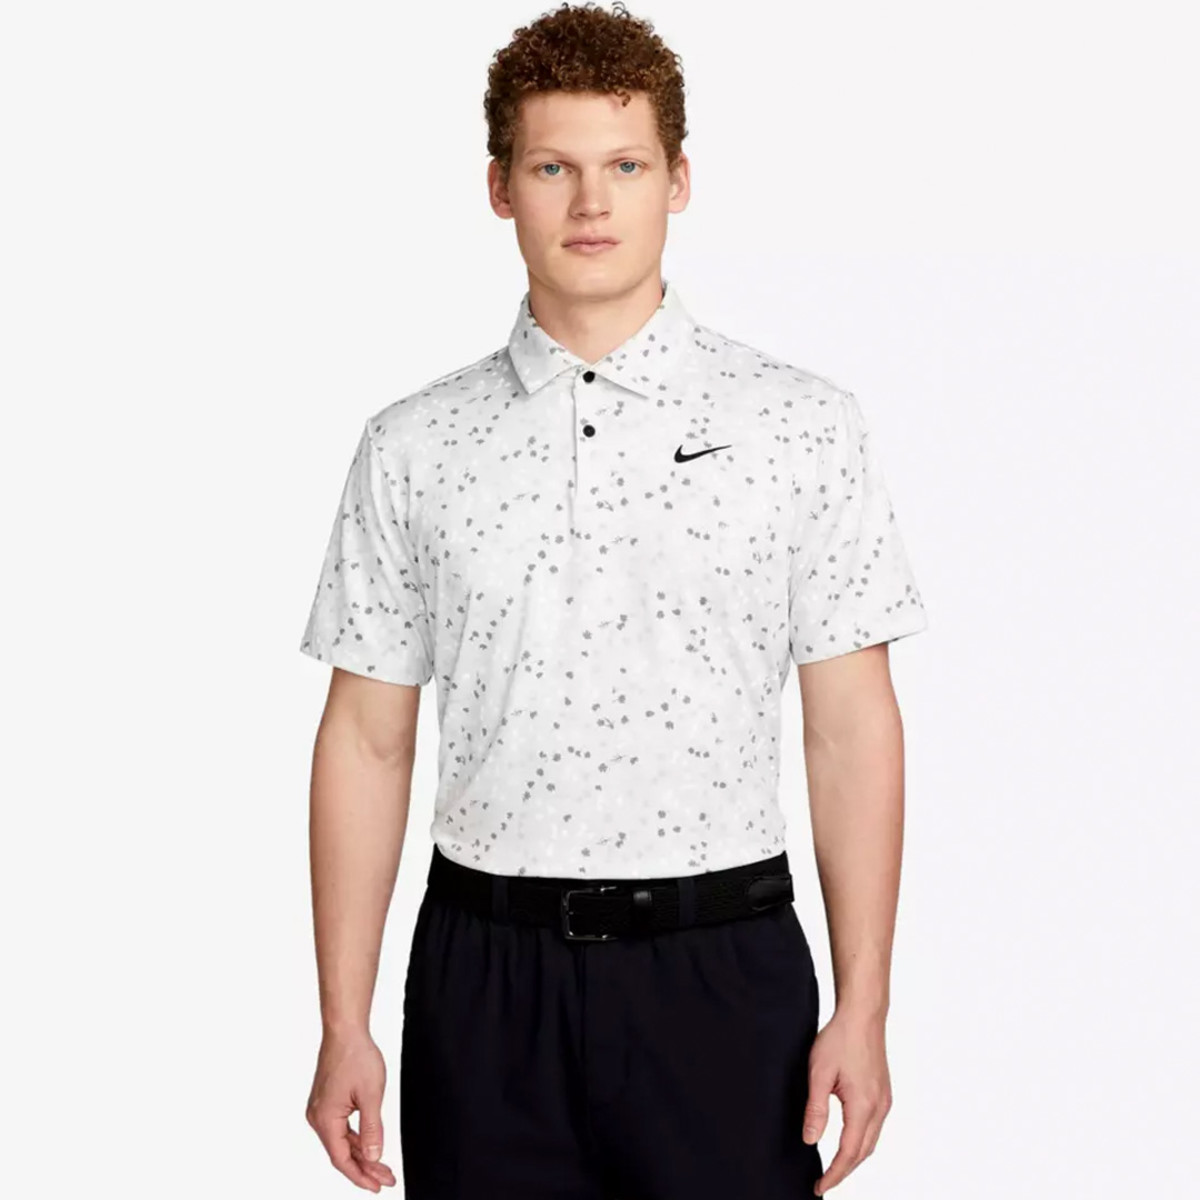 The Nike Dri-Fit Tour Men's Floral Golf Polo is on sale right now at PGA Tour Superstore